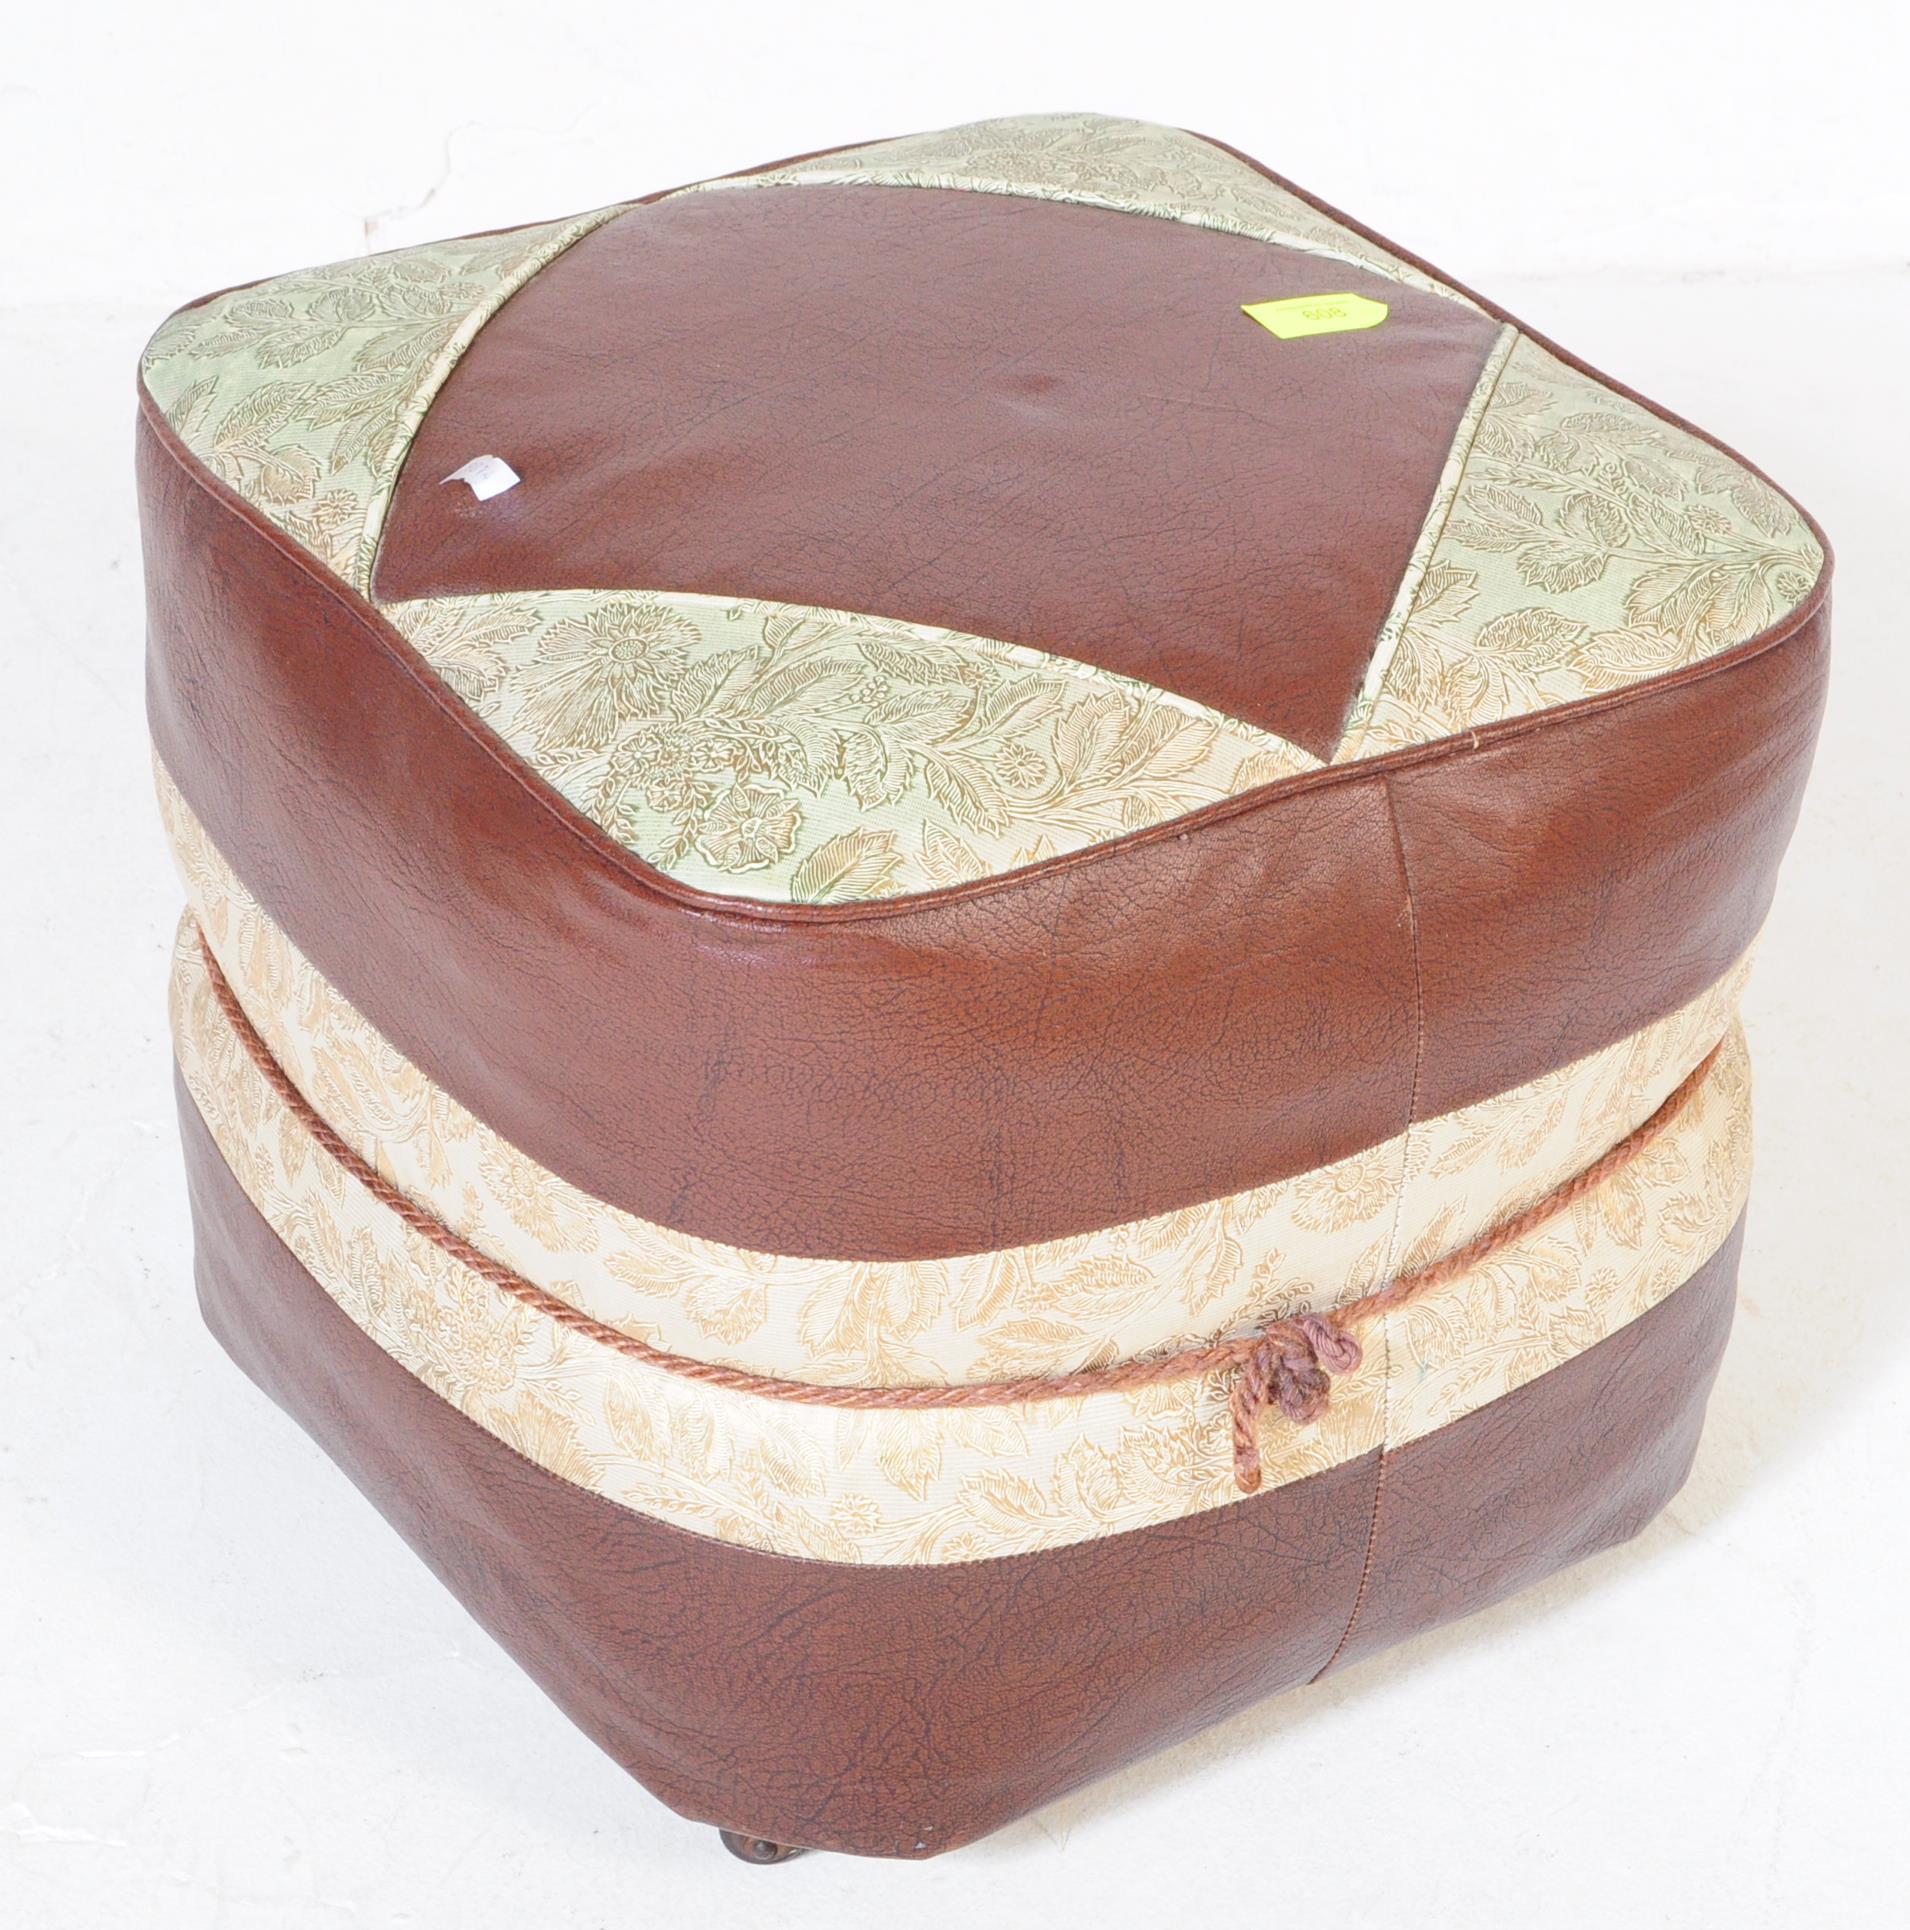 A RETRO VINTAGE BROWN LEATHERETTE PADDED POUF FOOT STOOL - Image 2 of 5